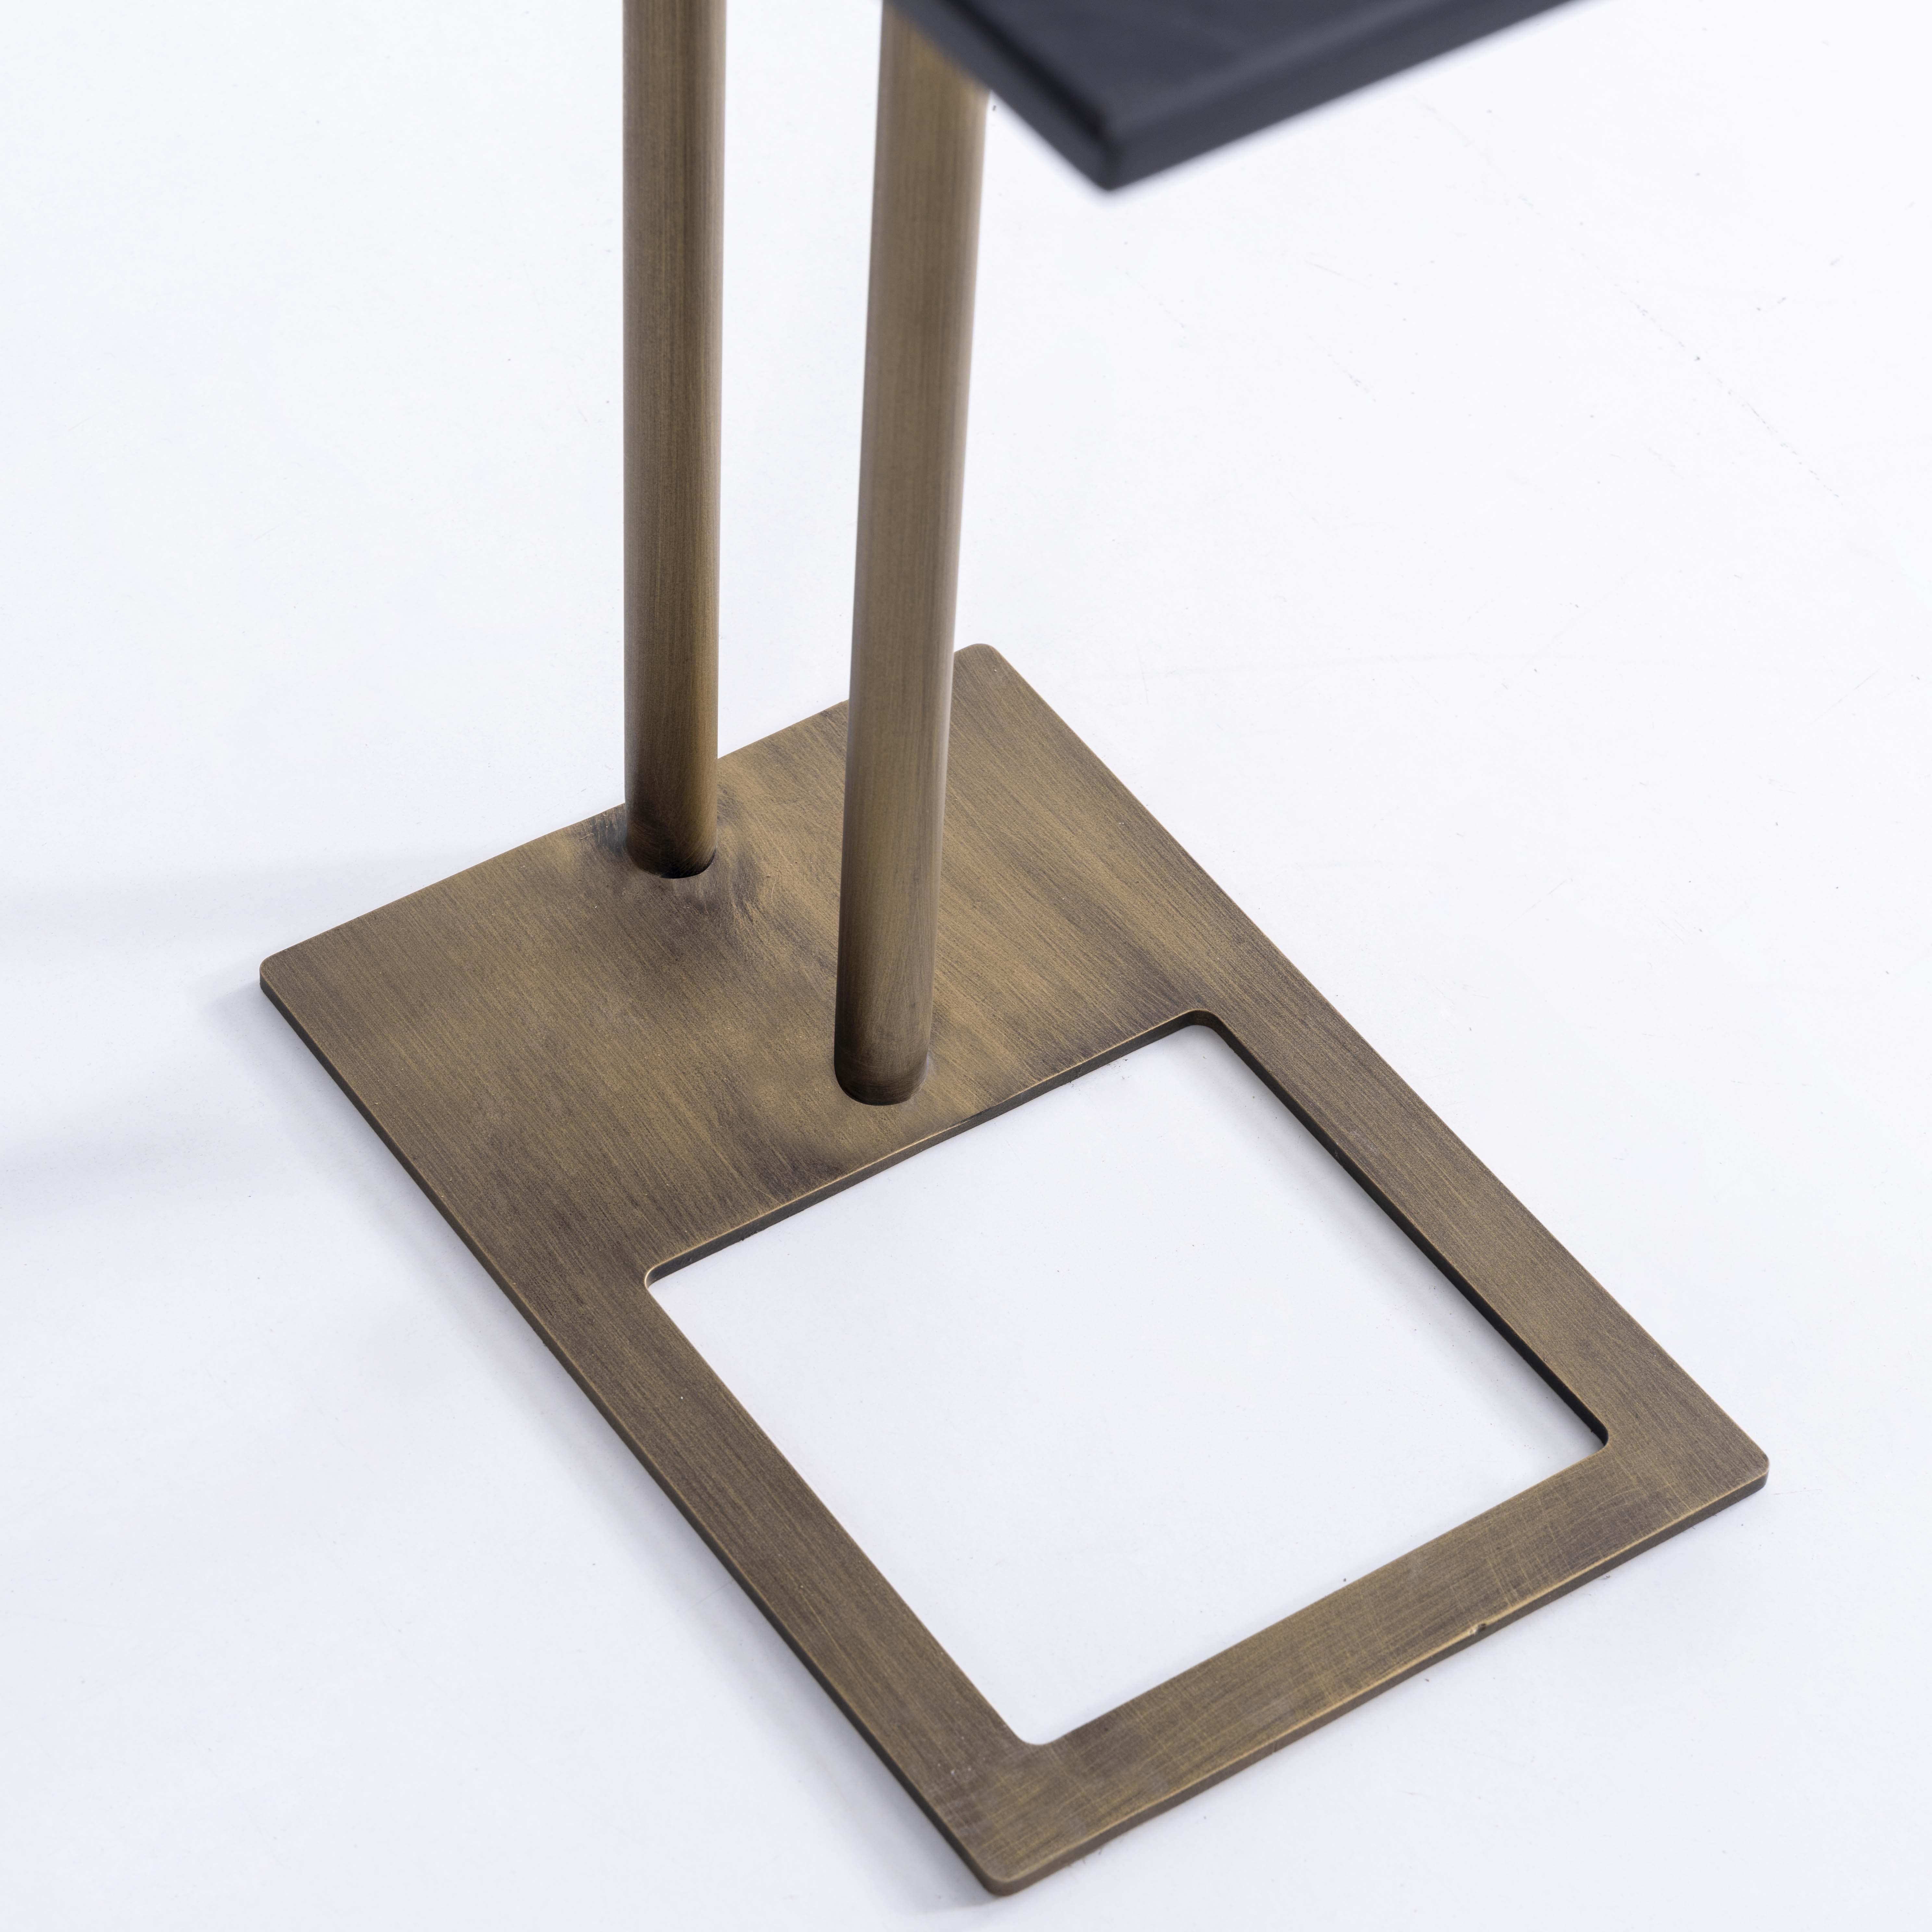 Parla Side Table